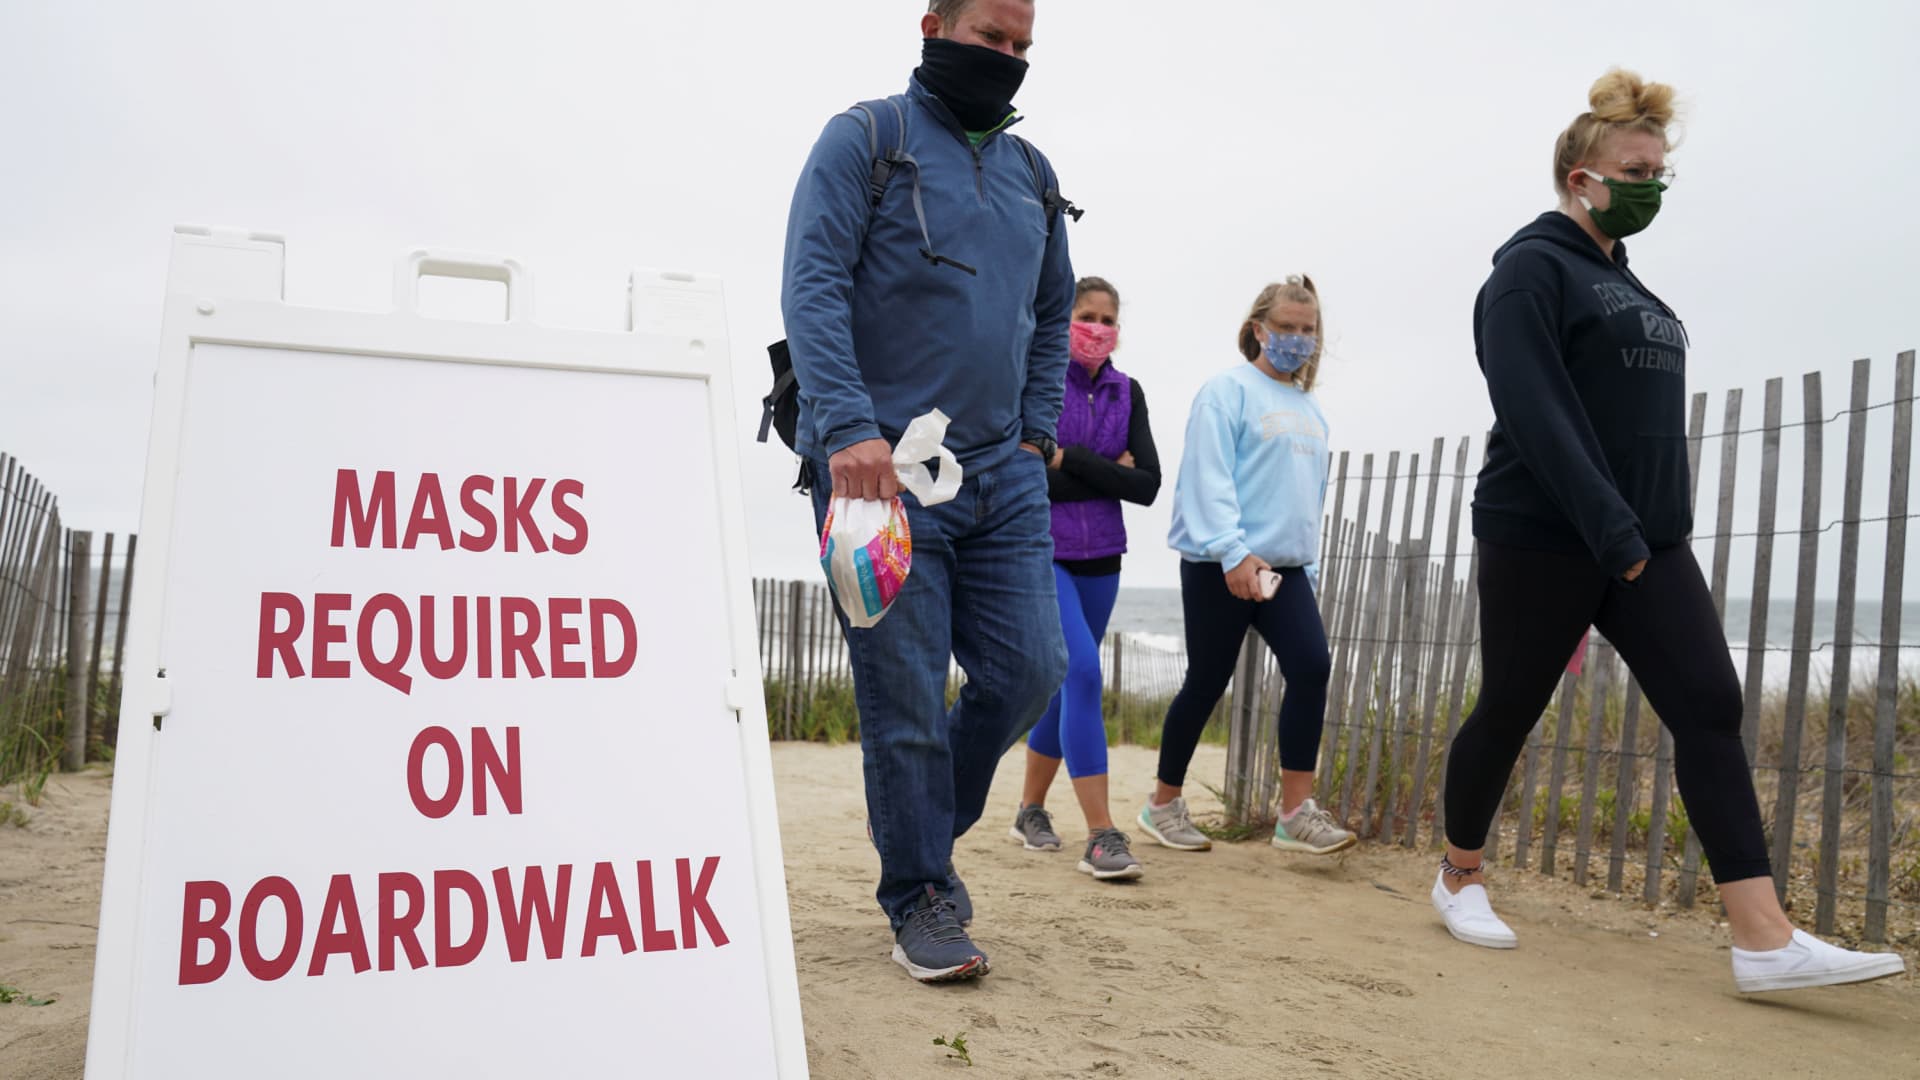 Visitors walk past a sign requiring face masks to stop the spread of the coronavirus disease (COVID-19) during Memorial Day weekend at Bethany Beach, Delaware, May 24, 2020.